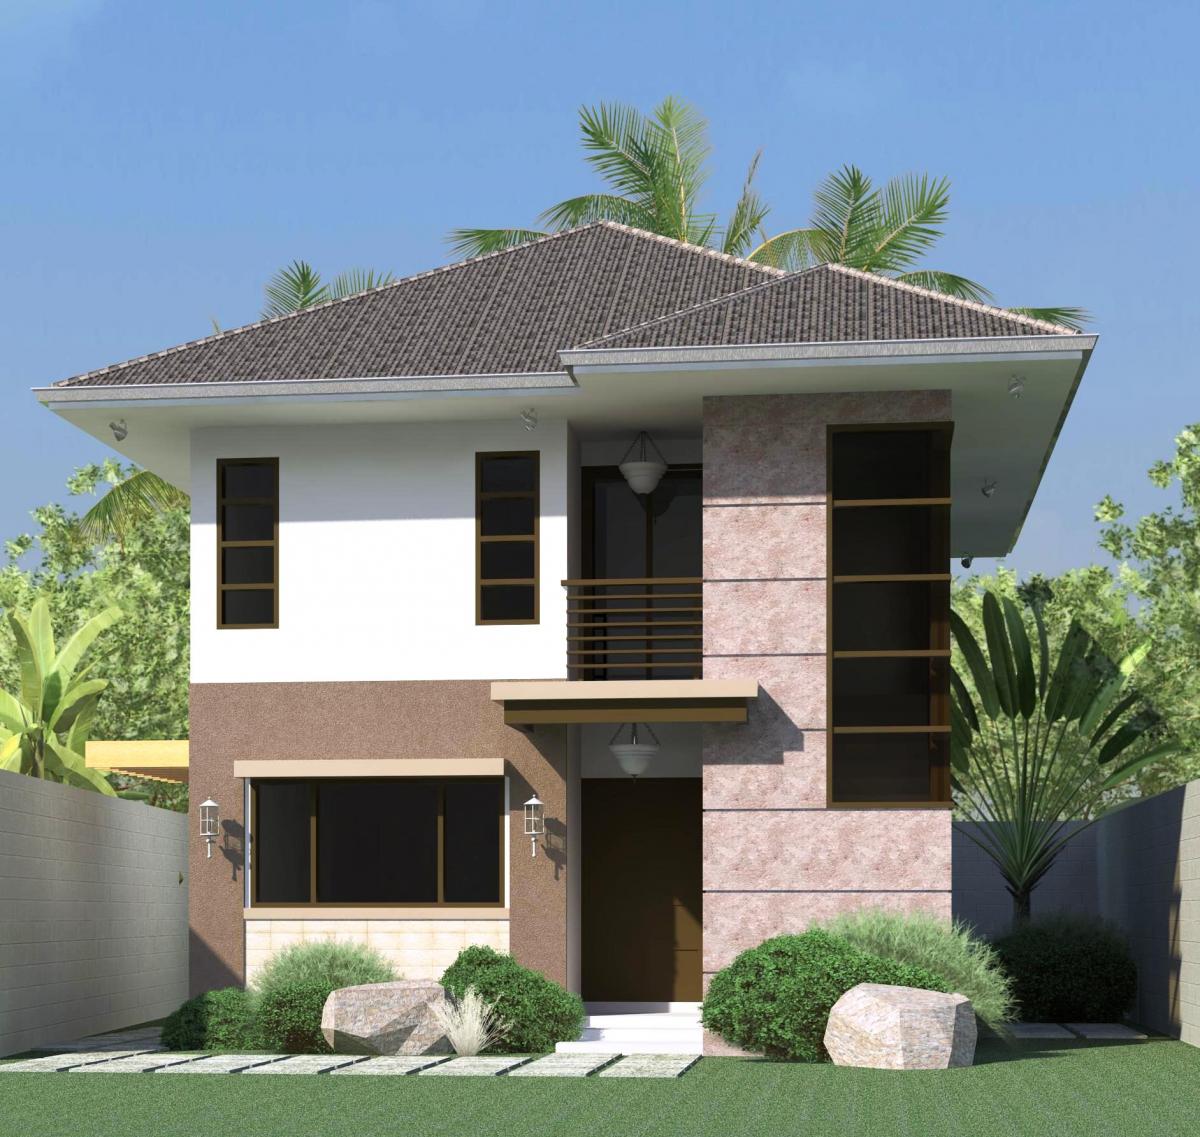 Proposed 2-Storey Residential